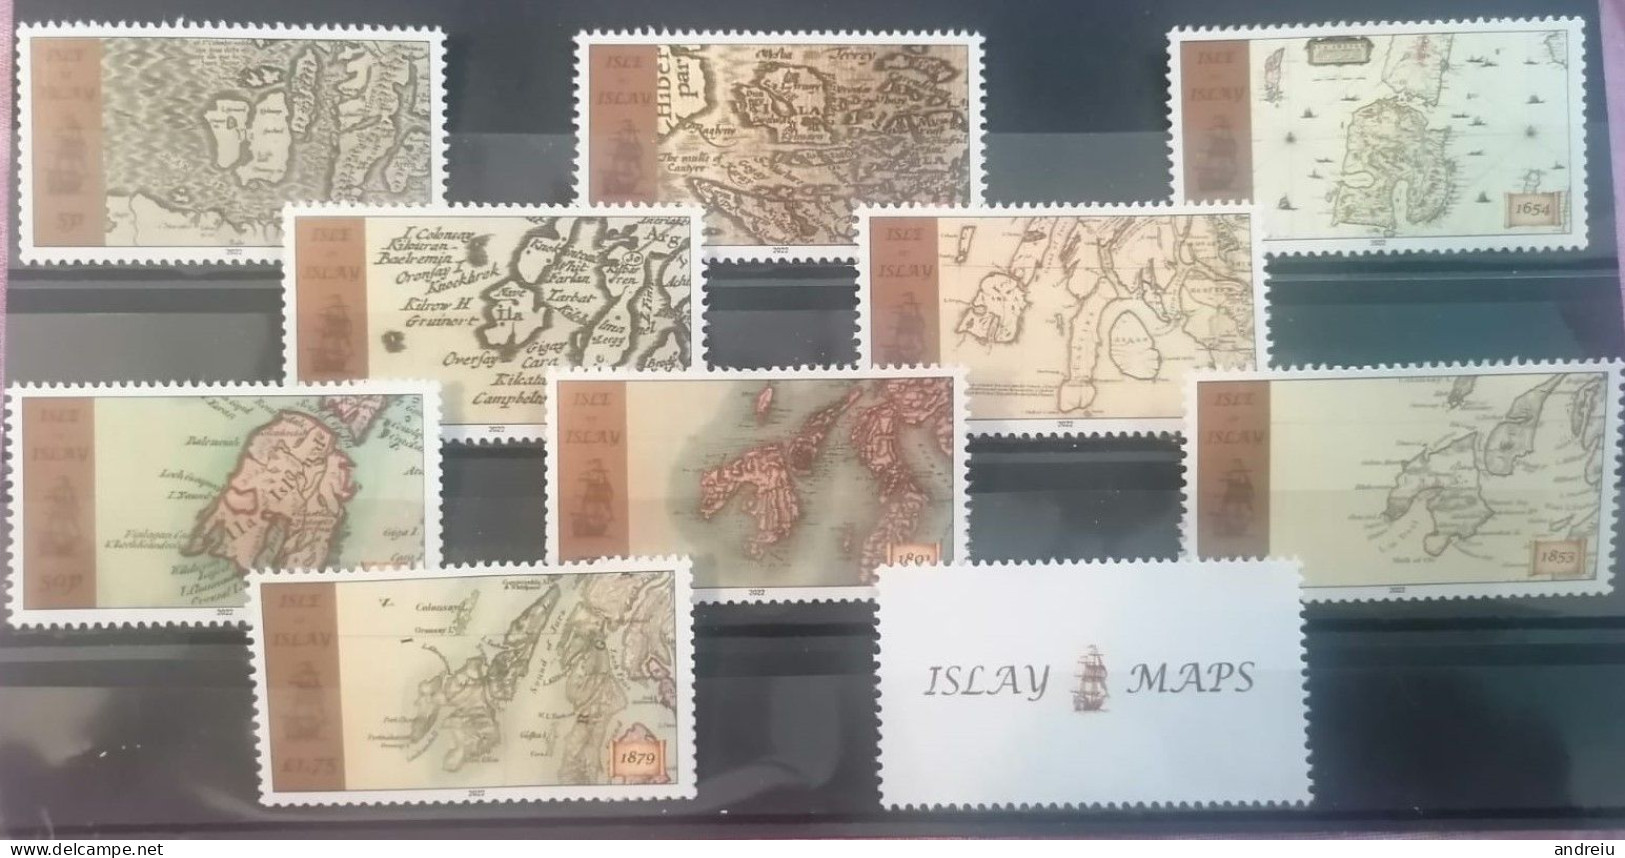 2022 GB Locals: Isle Of Islay - Old Maps Of Islay 9v+label, Geography, Cartes, Karten, Mapas MNH - Iles